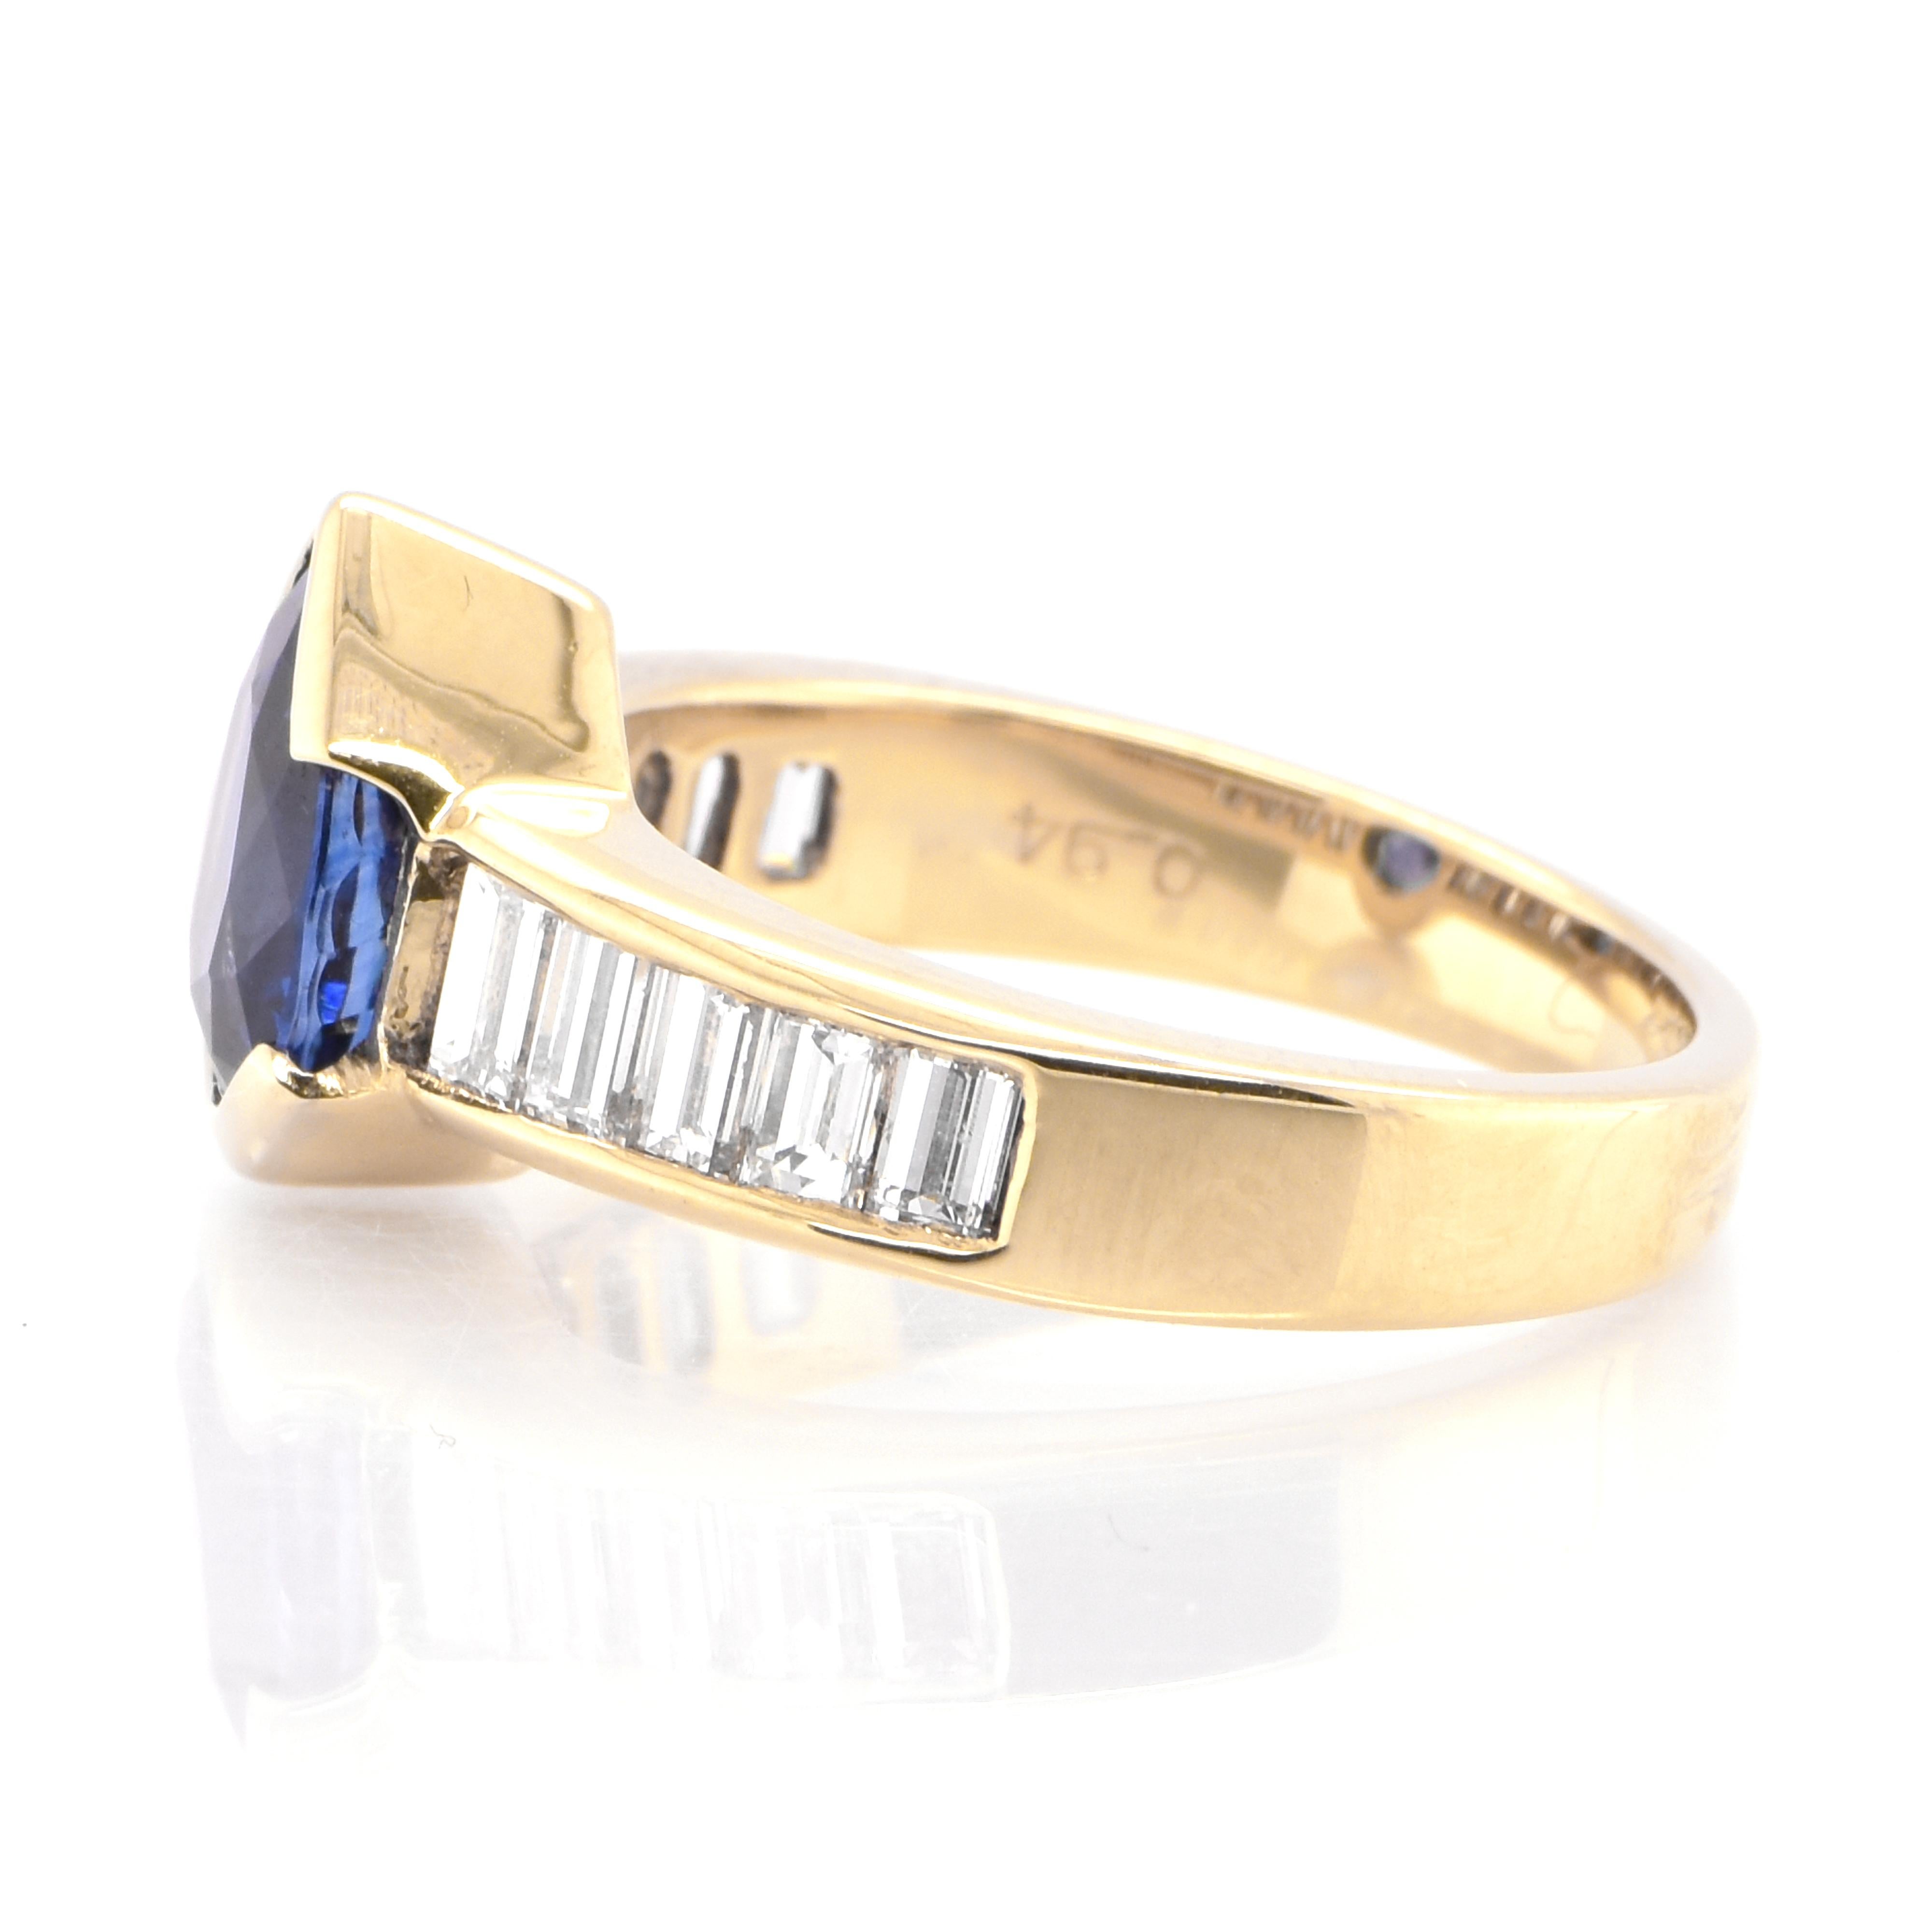 Pear Cut 2.17 Carat Natural Sapphire and Diamond Baguette Ring Set in 18k Yellow Gold